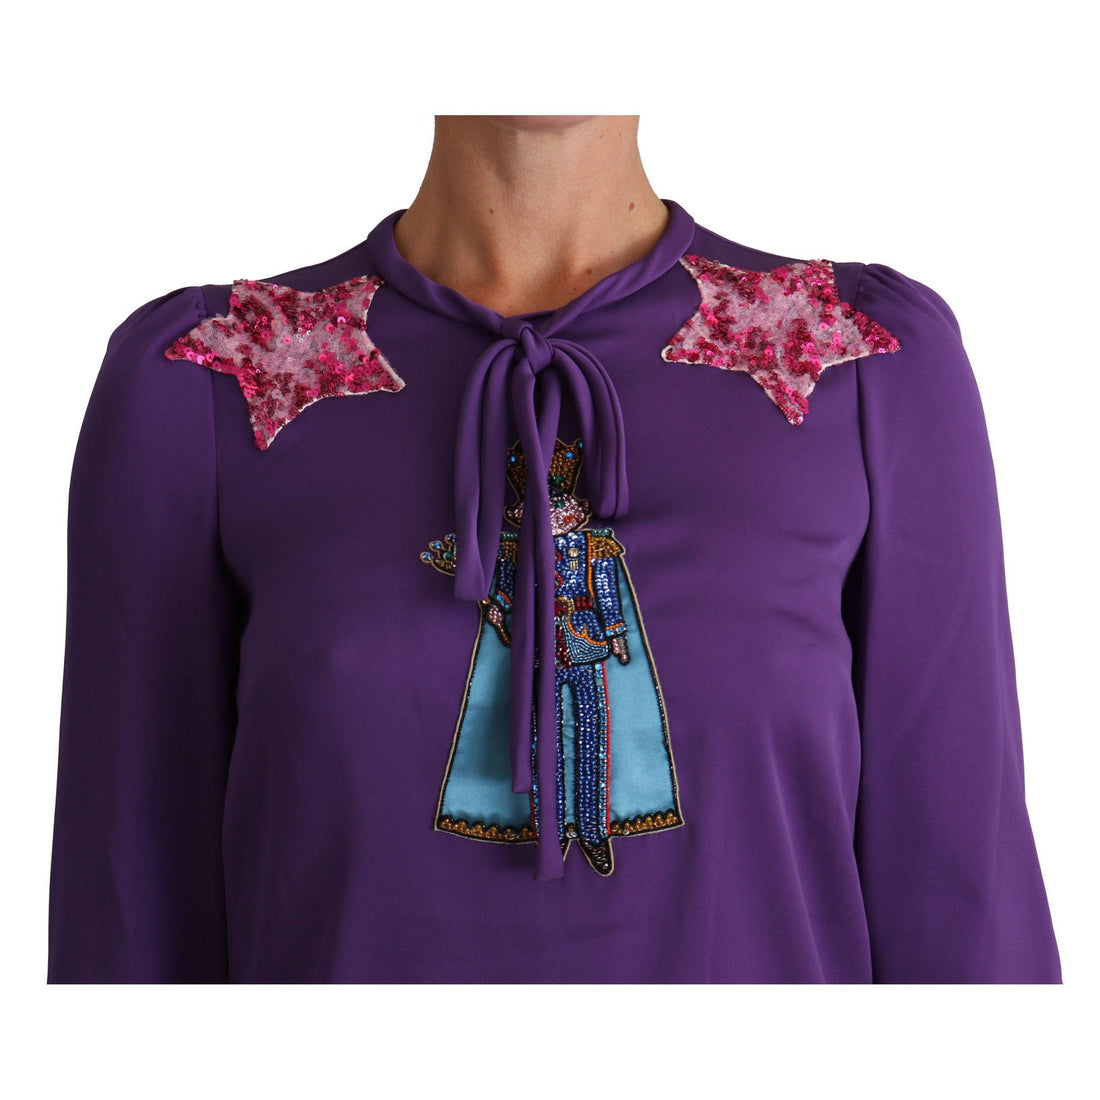 Dolce & Gabbana Purple Blouse Prince Fairy Tale Embellished Top - Paris Deluxe